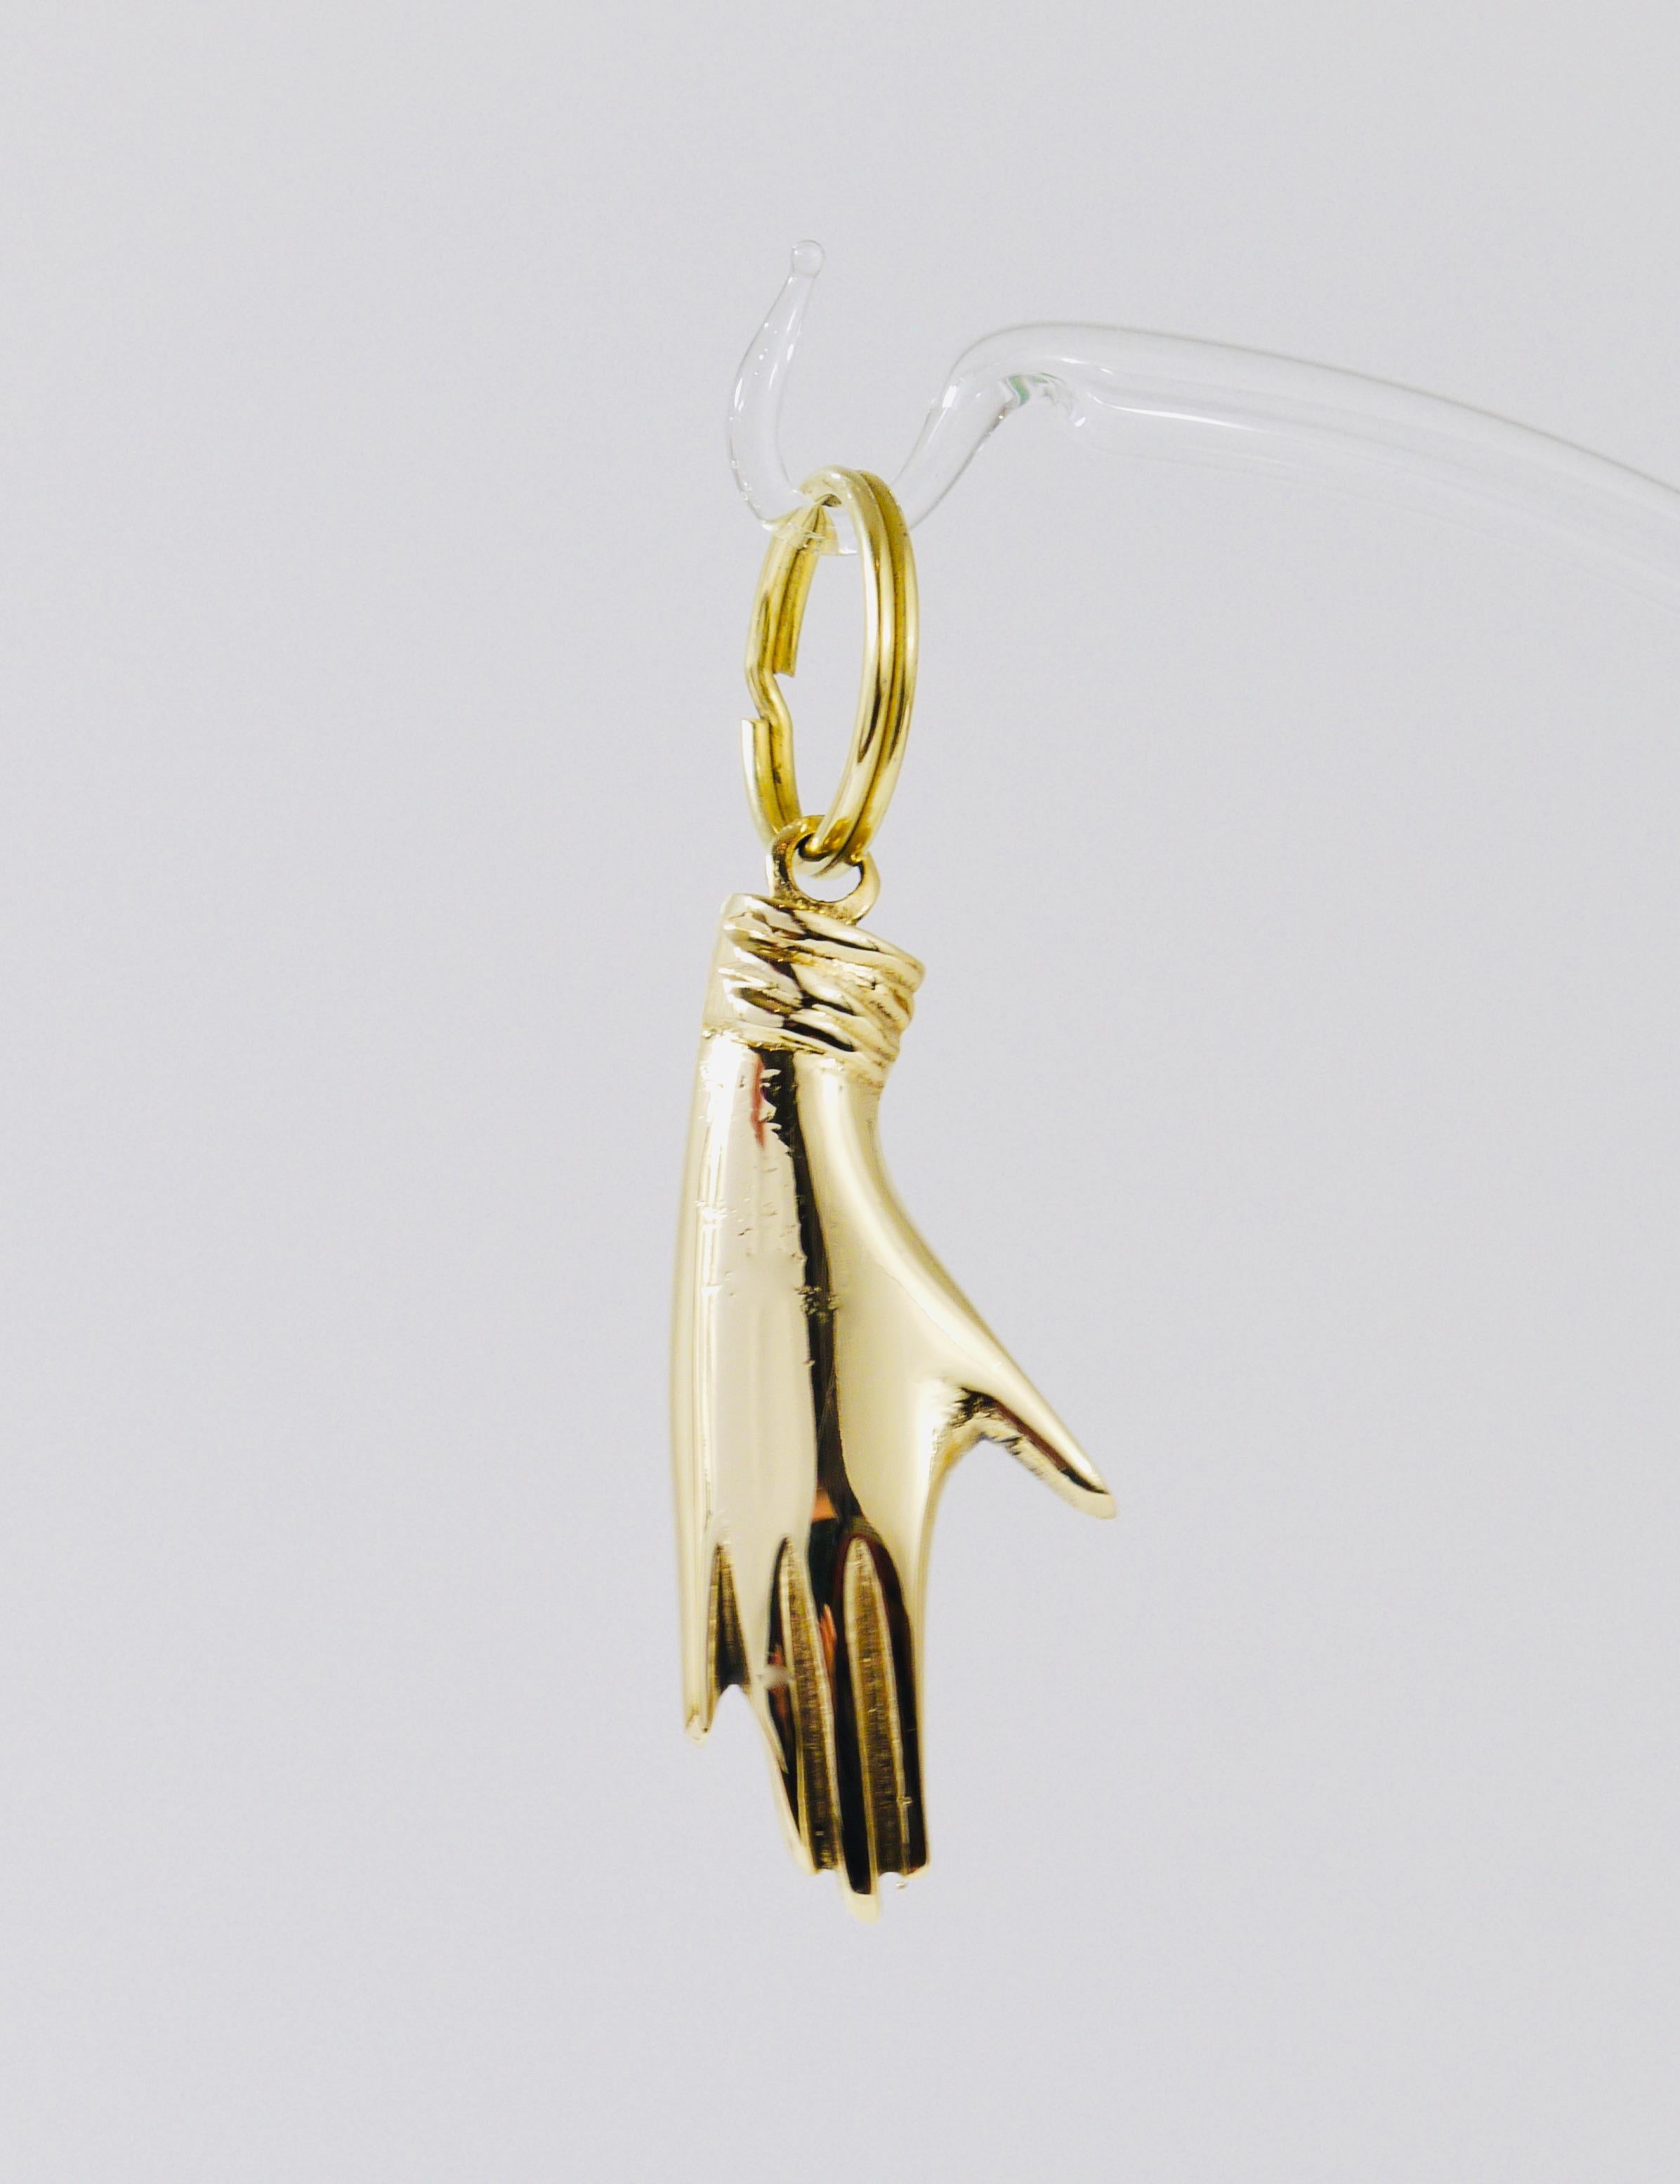 Polished Carl Auböck Handcrafted Midcentury Hand Figurine Key Ring Chain Holder For Sale